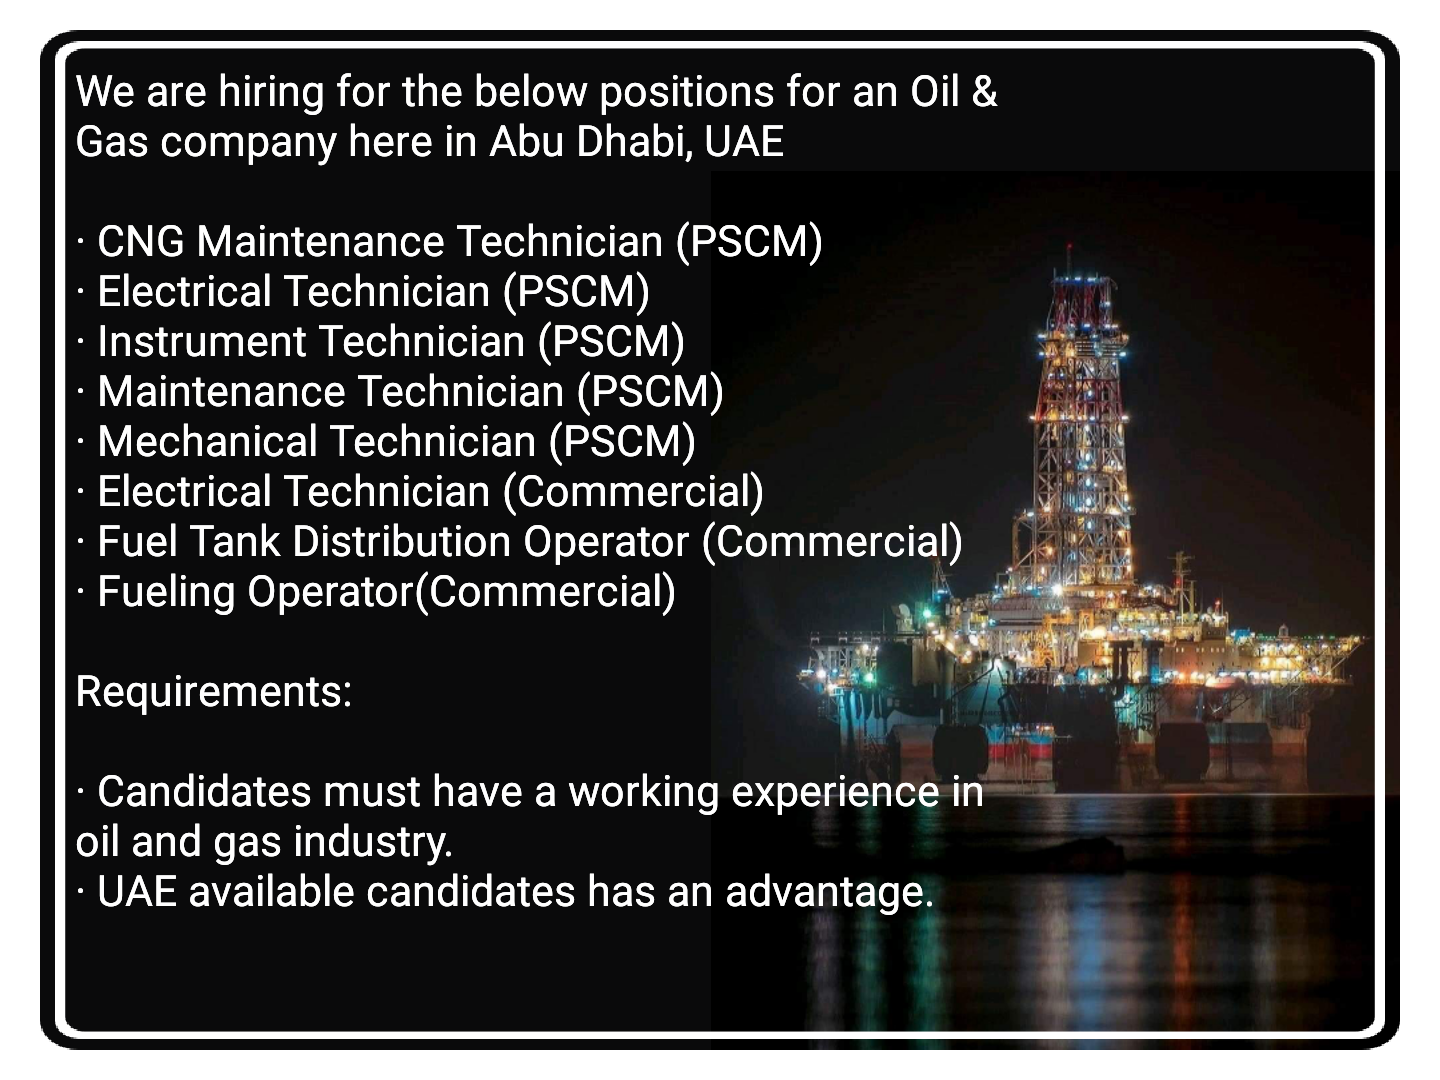 Mechanical, Electrical, Instrument, CNG Maintenance Technician & Fueling Operator Jobs